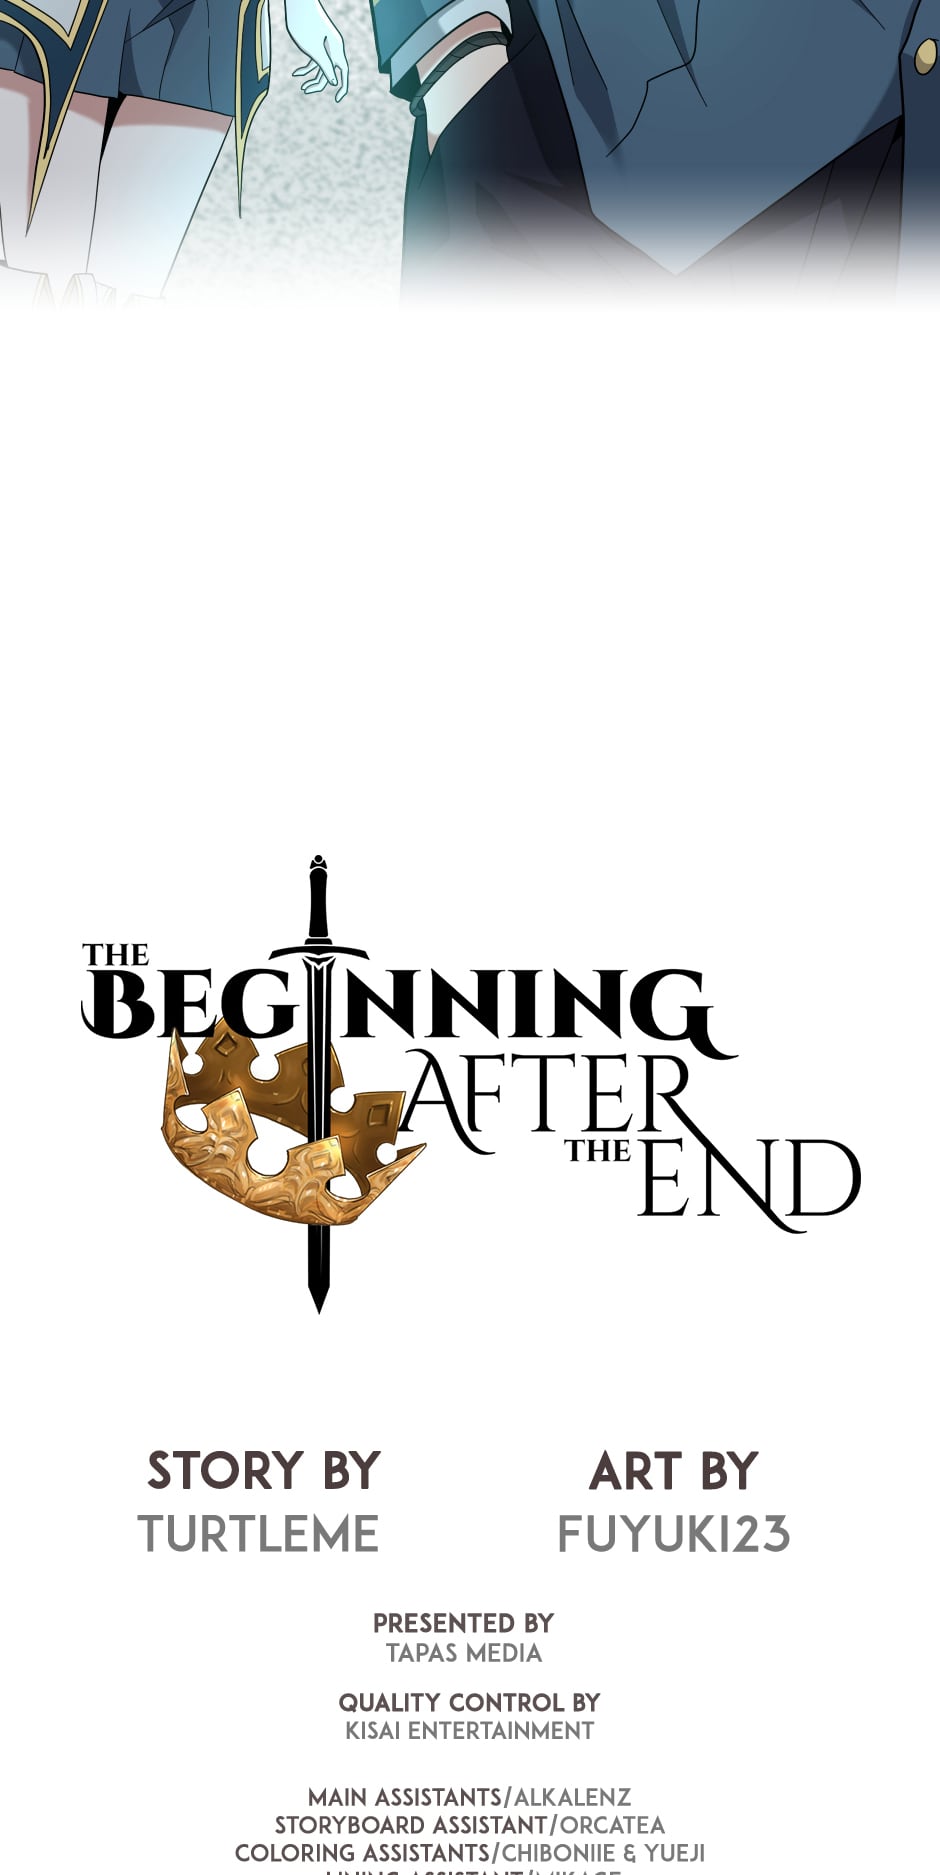 The Beginning After the End image